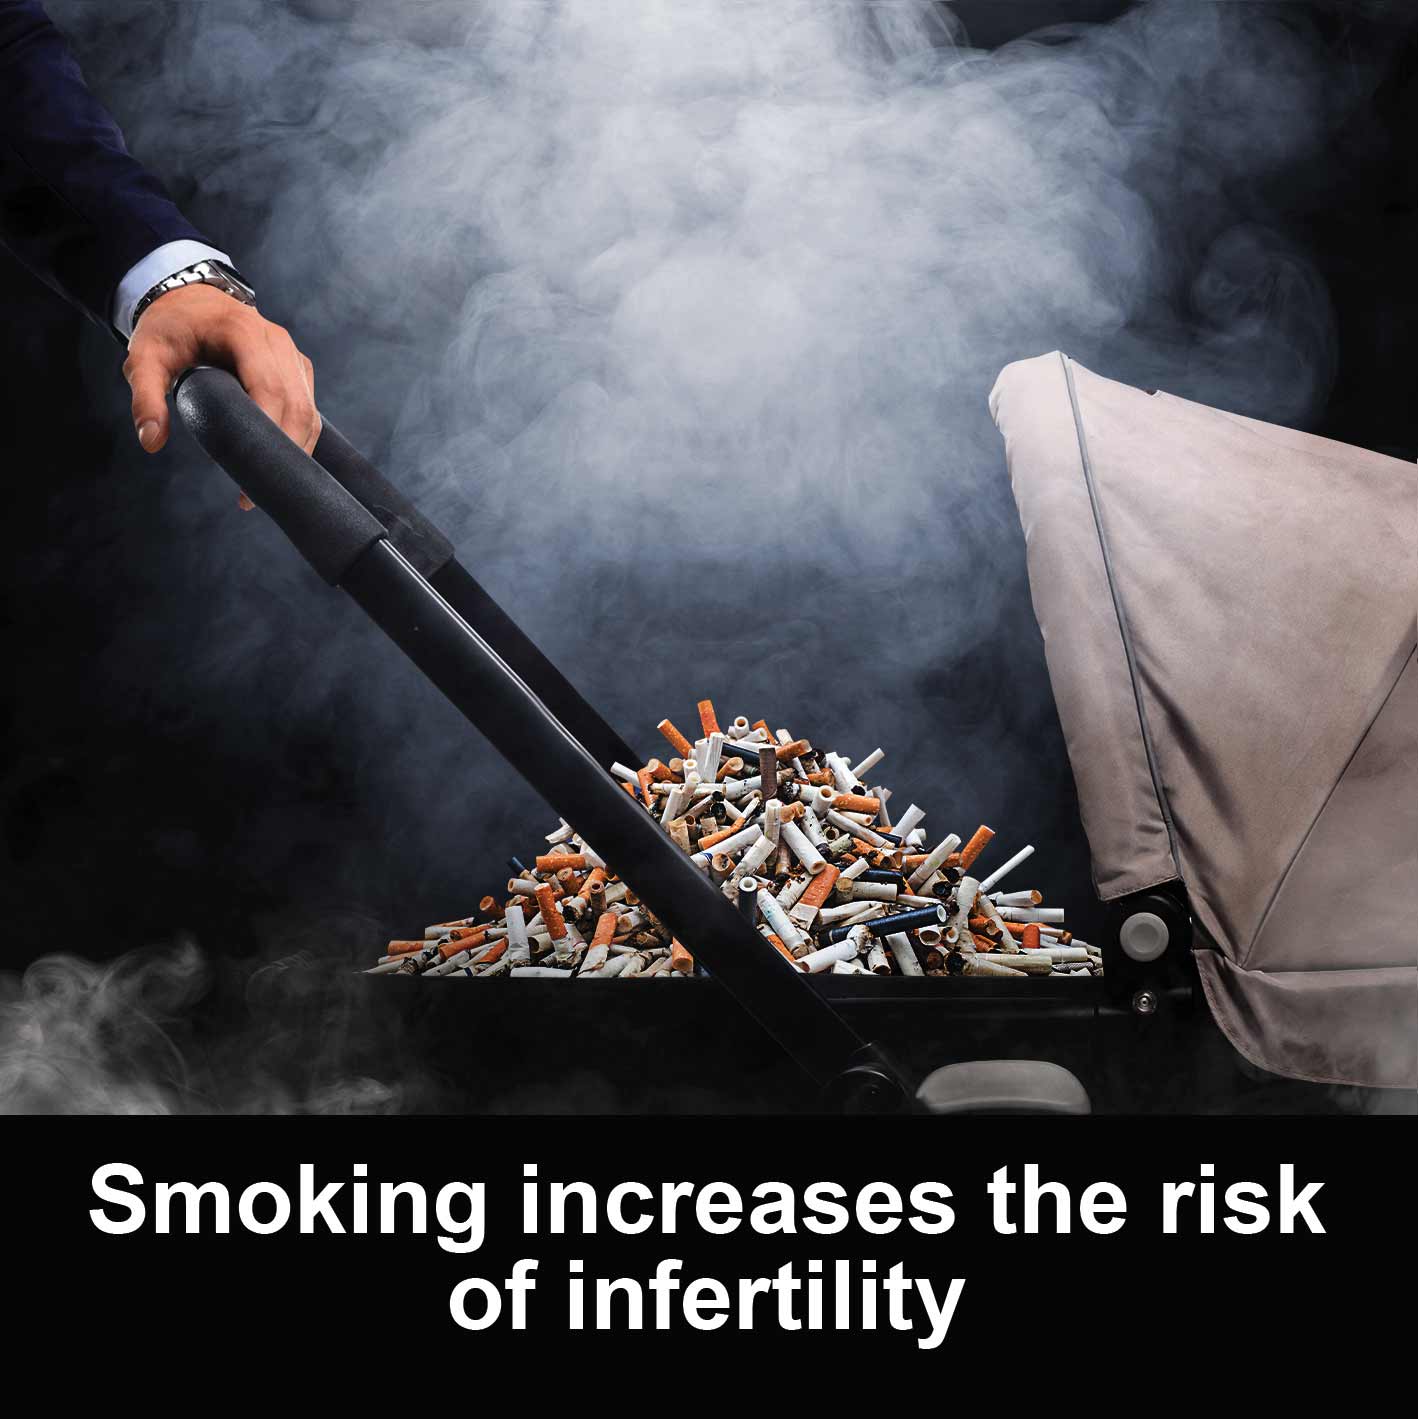 smoking-increases-infertility-risk